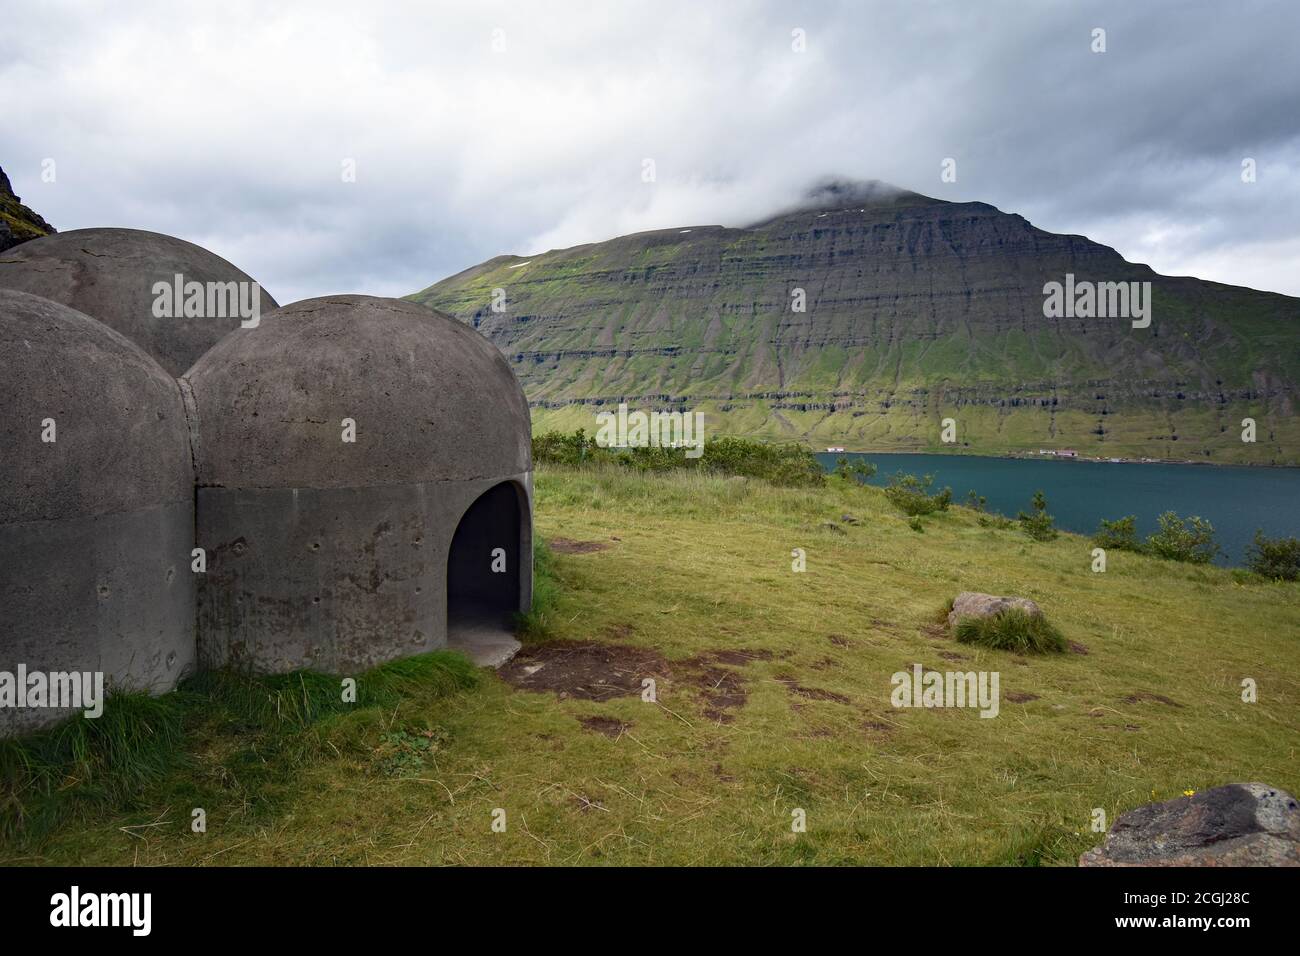 The Tvísöngur Sound Sculpture on a mountainside in Seydisfjordur, Eastfjords, Iceland.  The opposite side of the fjord can be see past the sculpture. Stock Photo